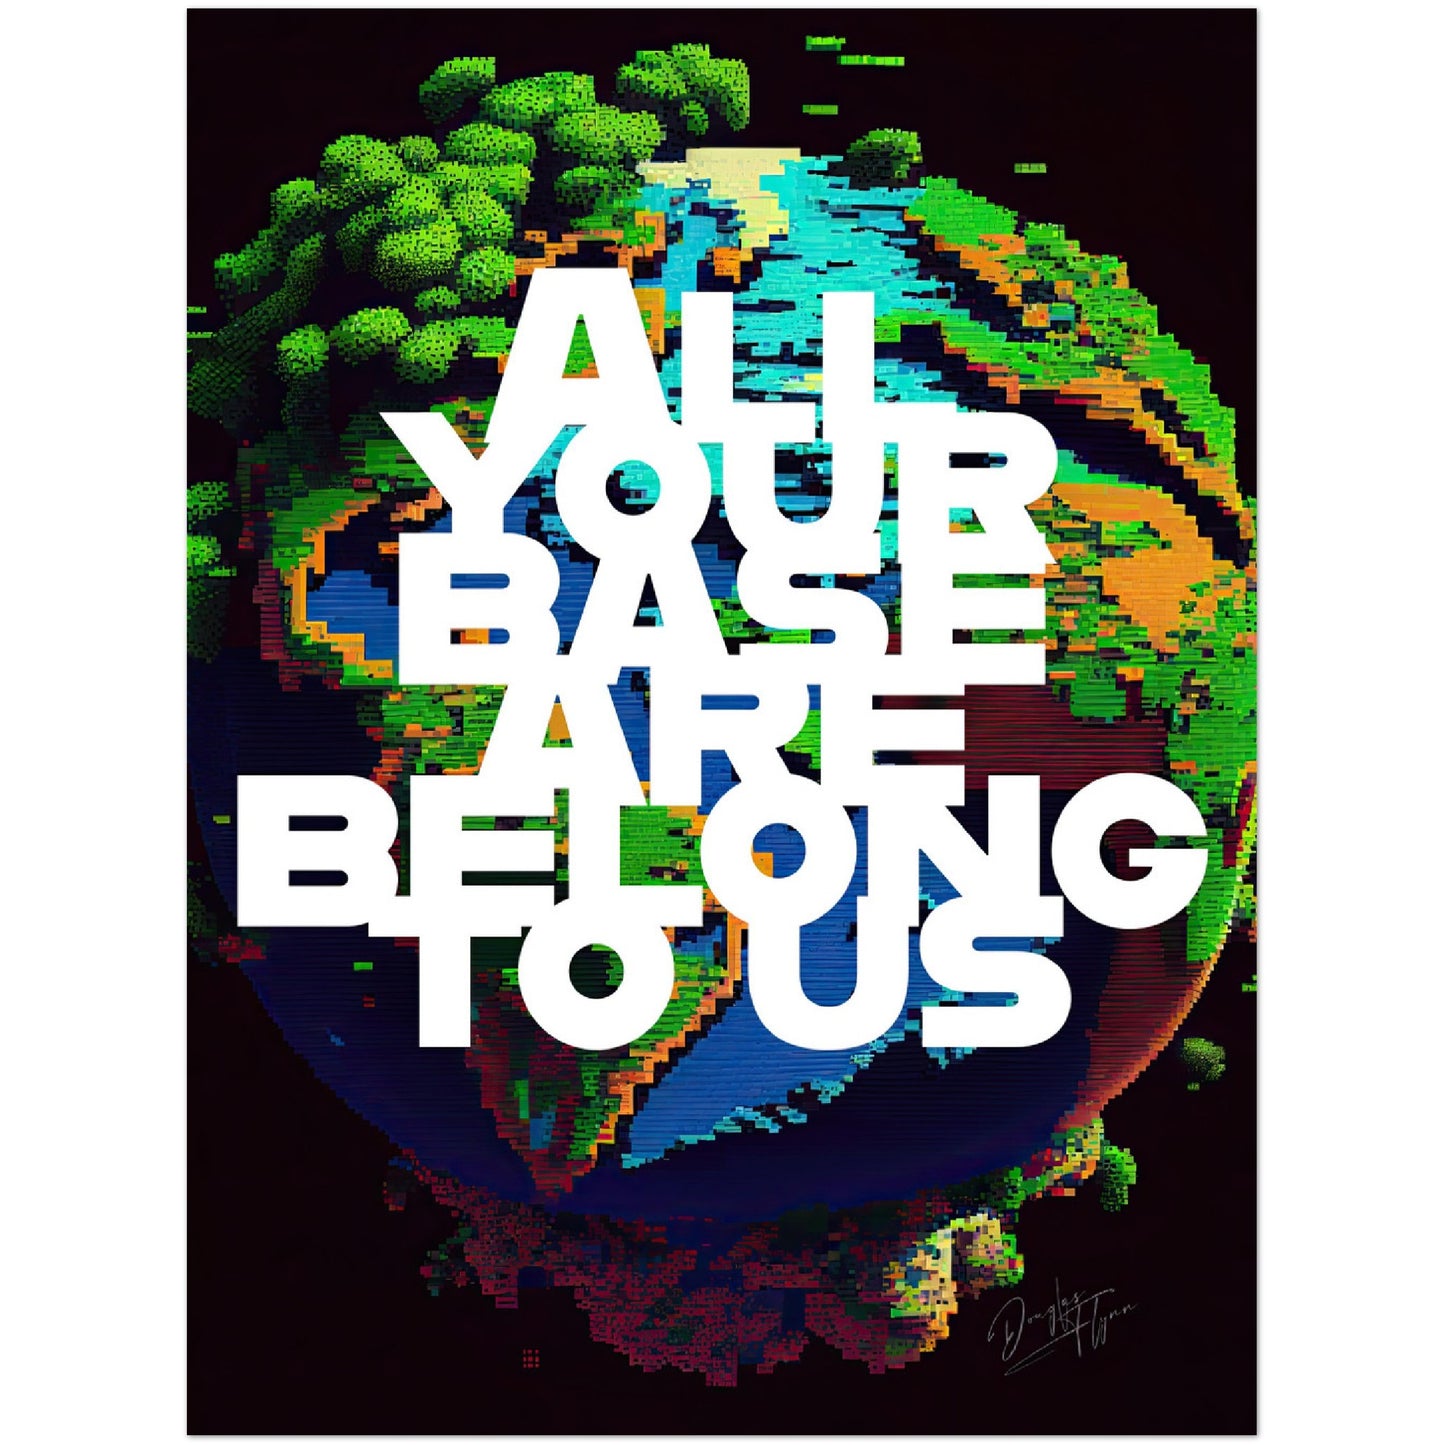 »All Your Base Are Belong To Us« retro poster